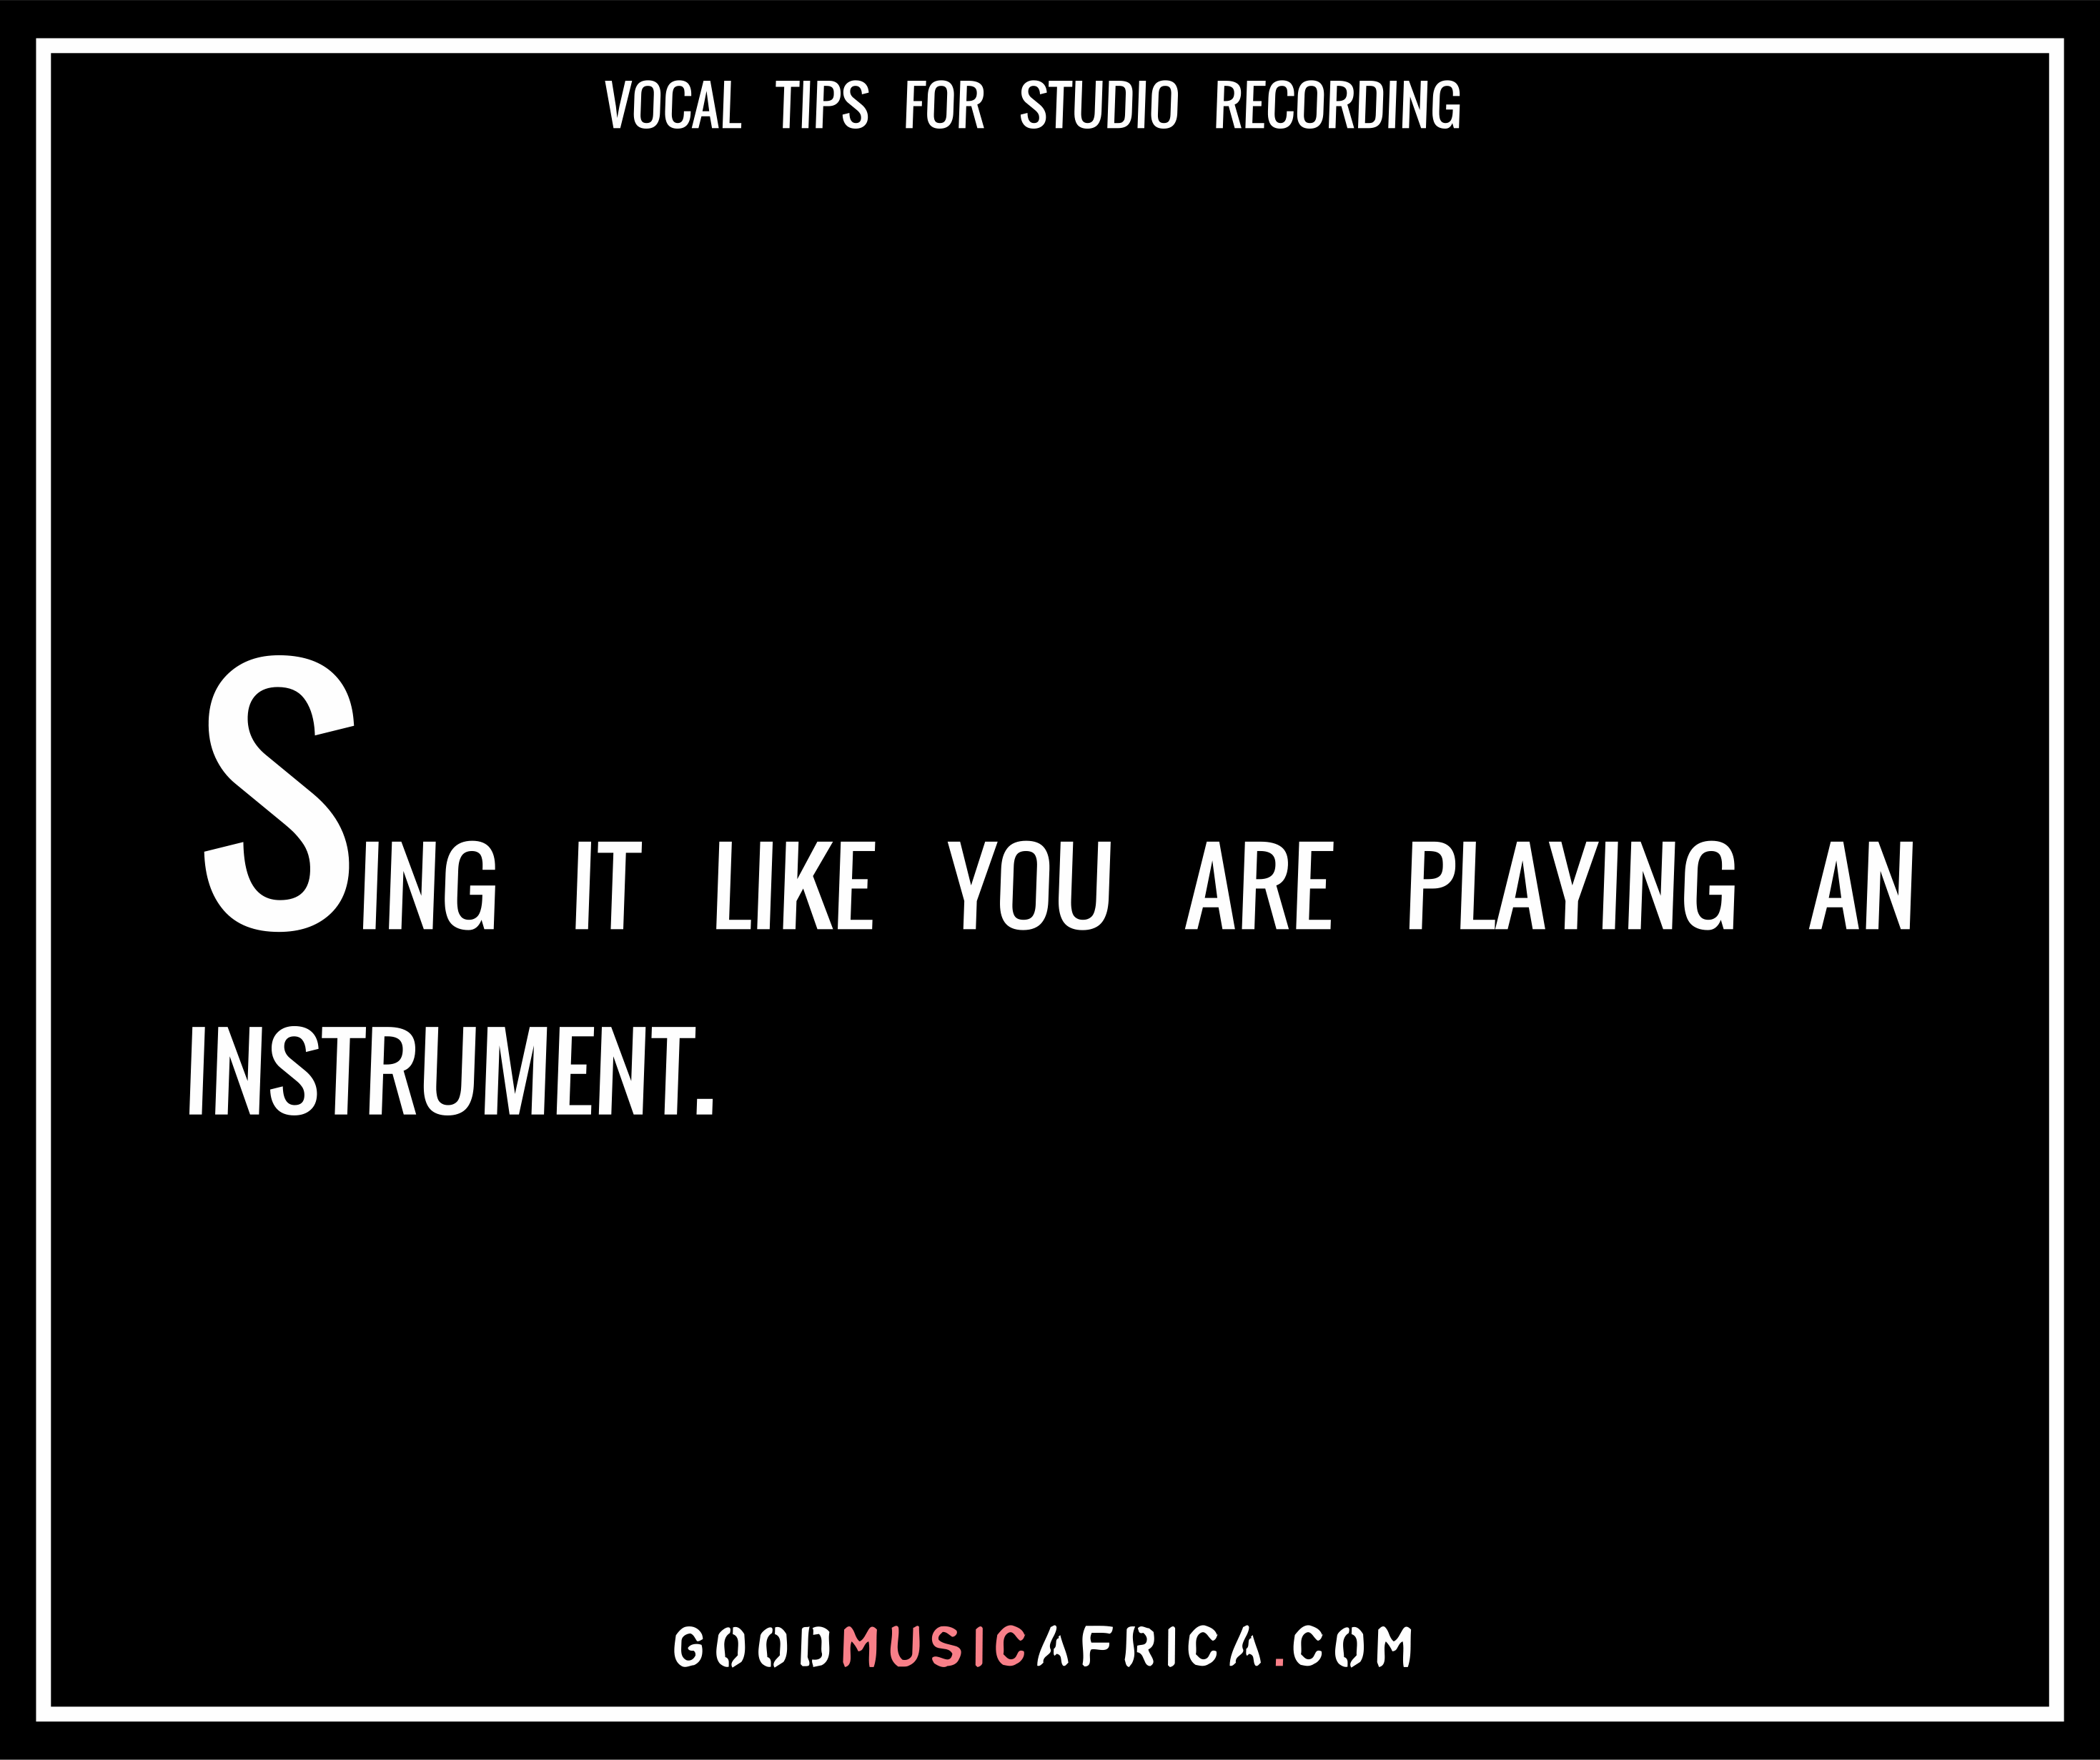 One Vocal Tips for Studio Recording - Sing it like you are playing an instrument that you can try right now